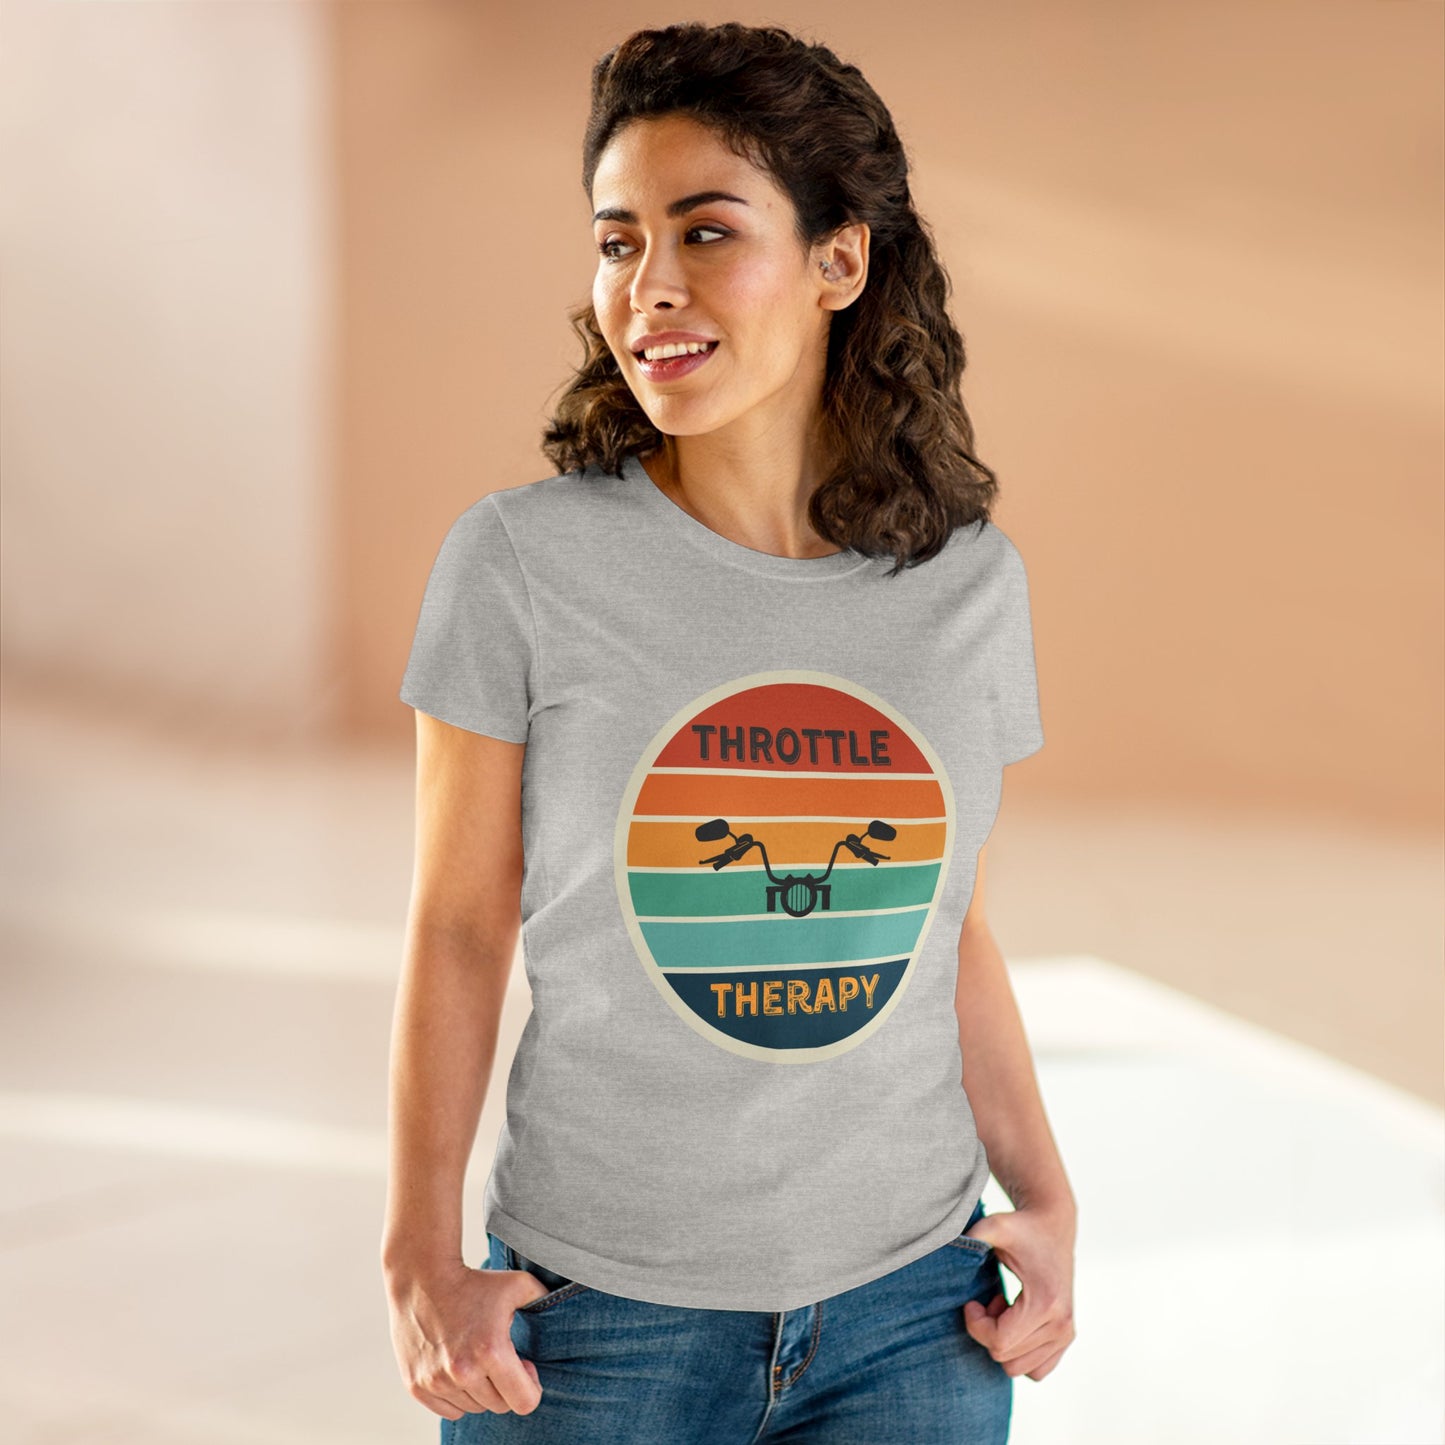 Throttle Therapy Tee for Women